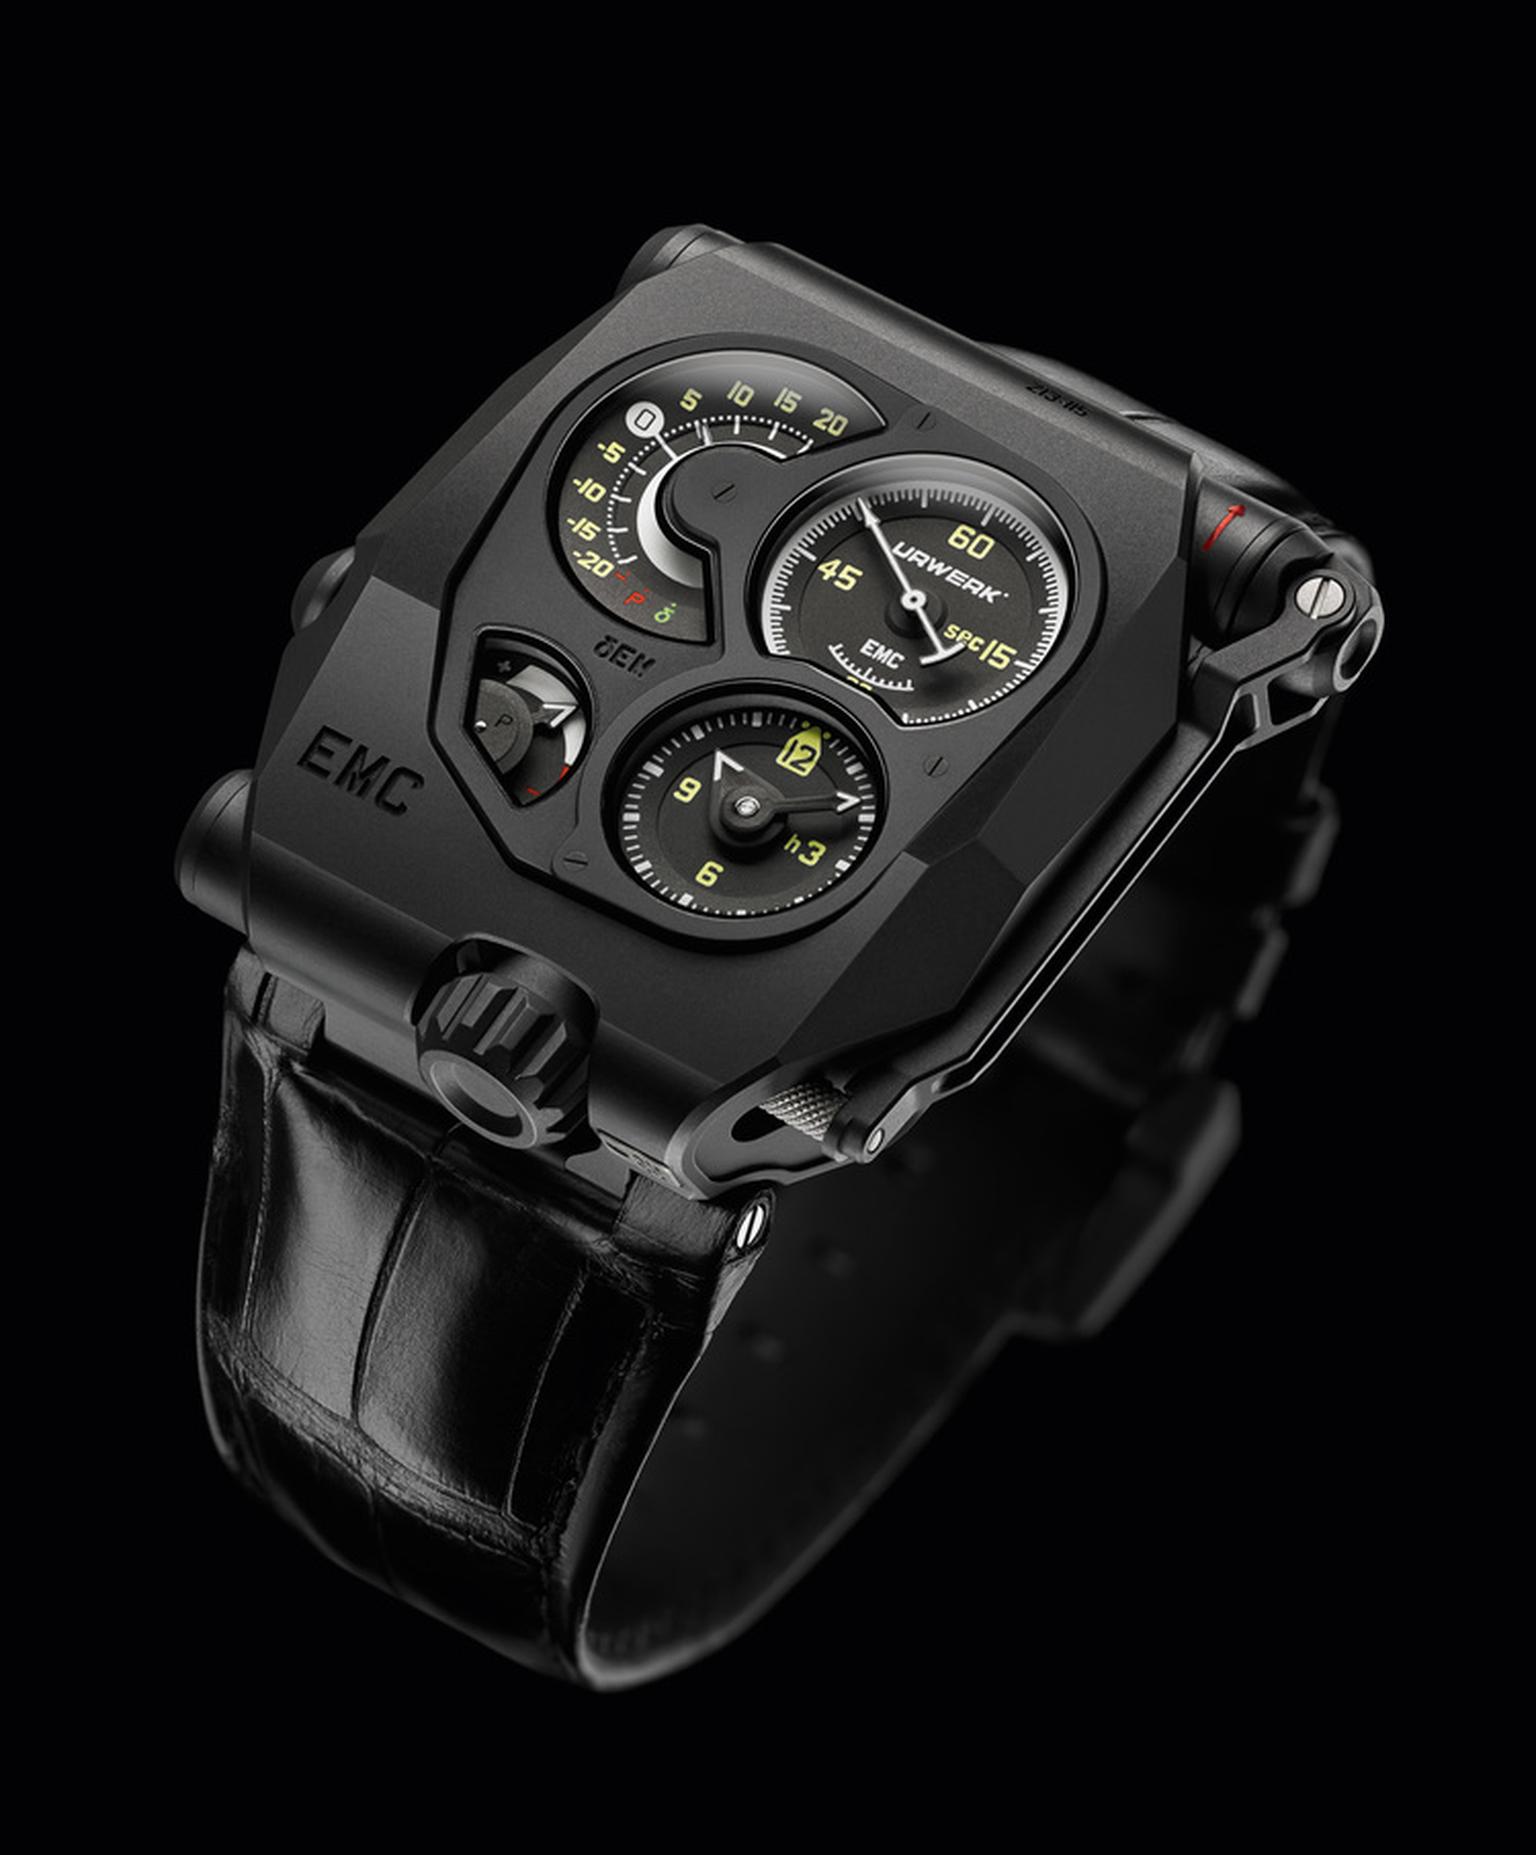 Urwerk’s futuristic looking watch, the EMC, won in two different categories:Mechanical Exception and Innovation.